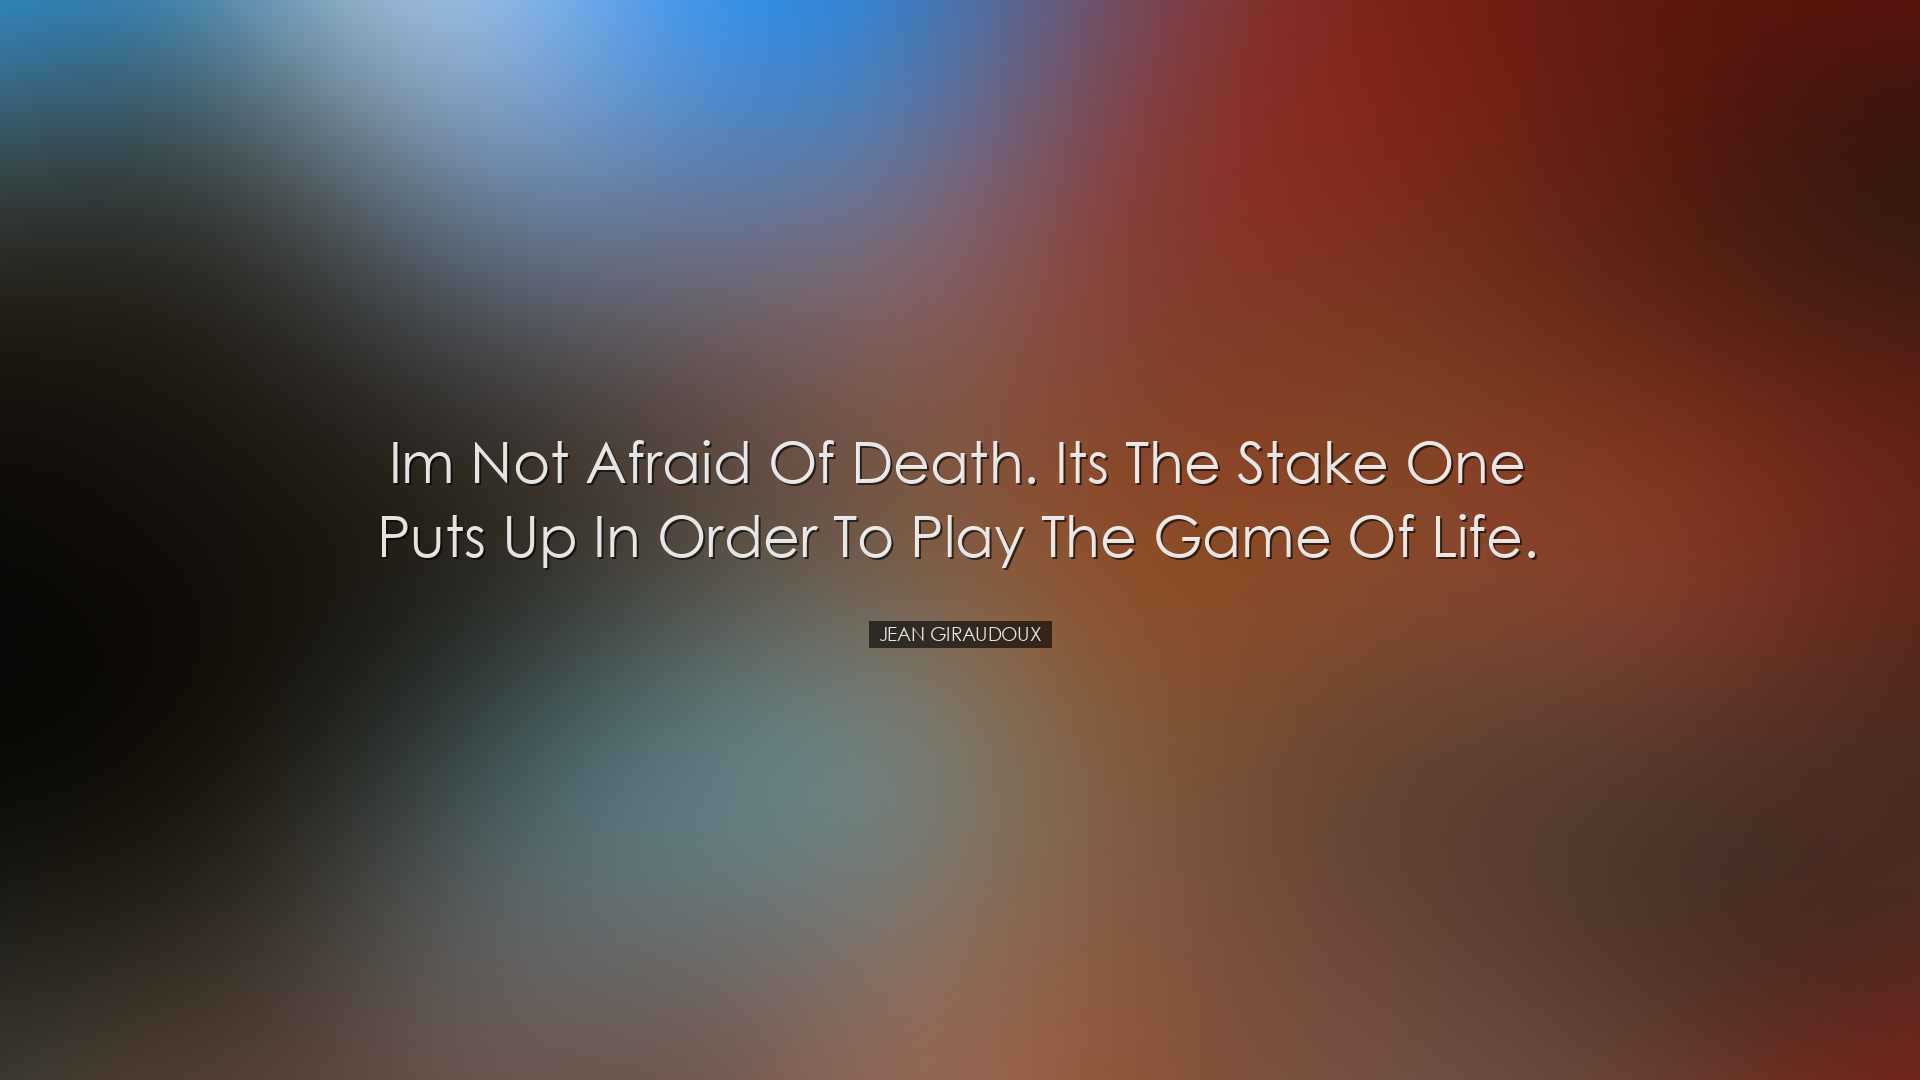 Im not afraid of death. Its the stake one puts up in order to play